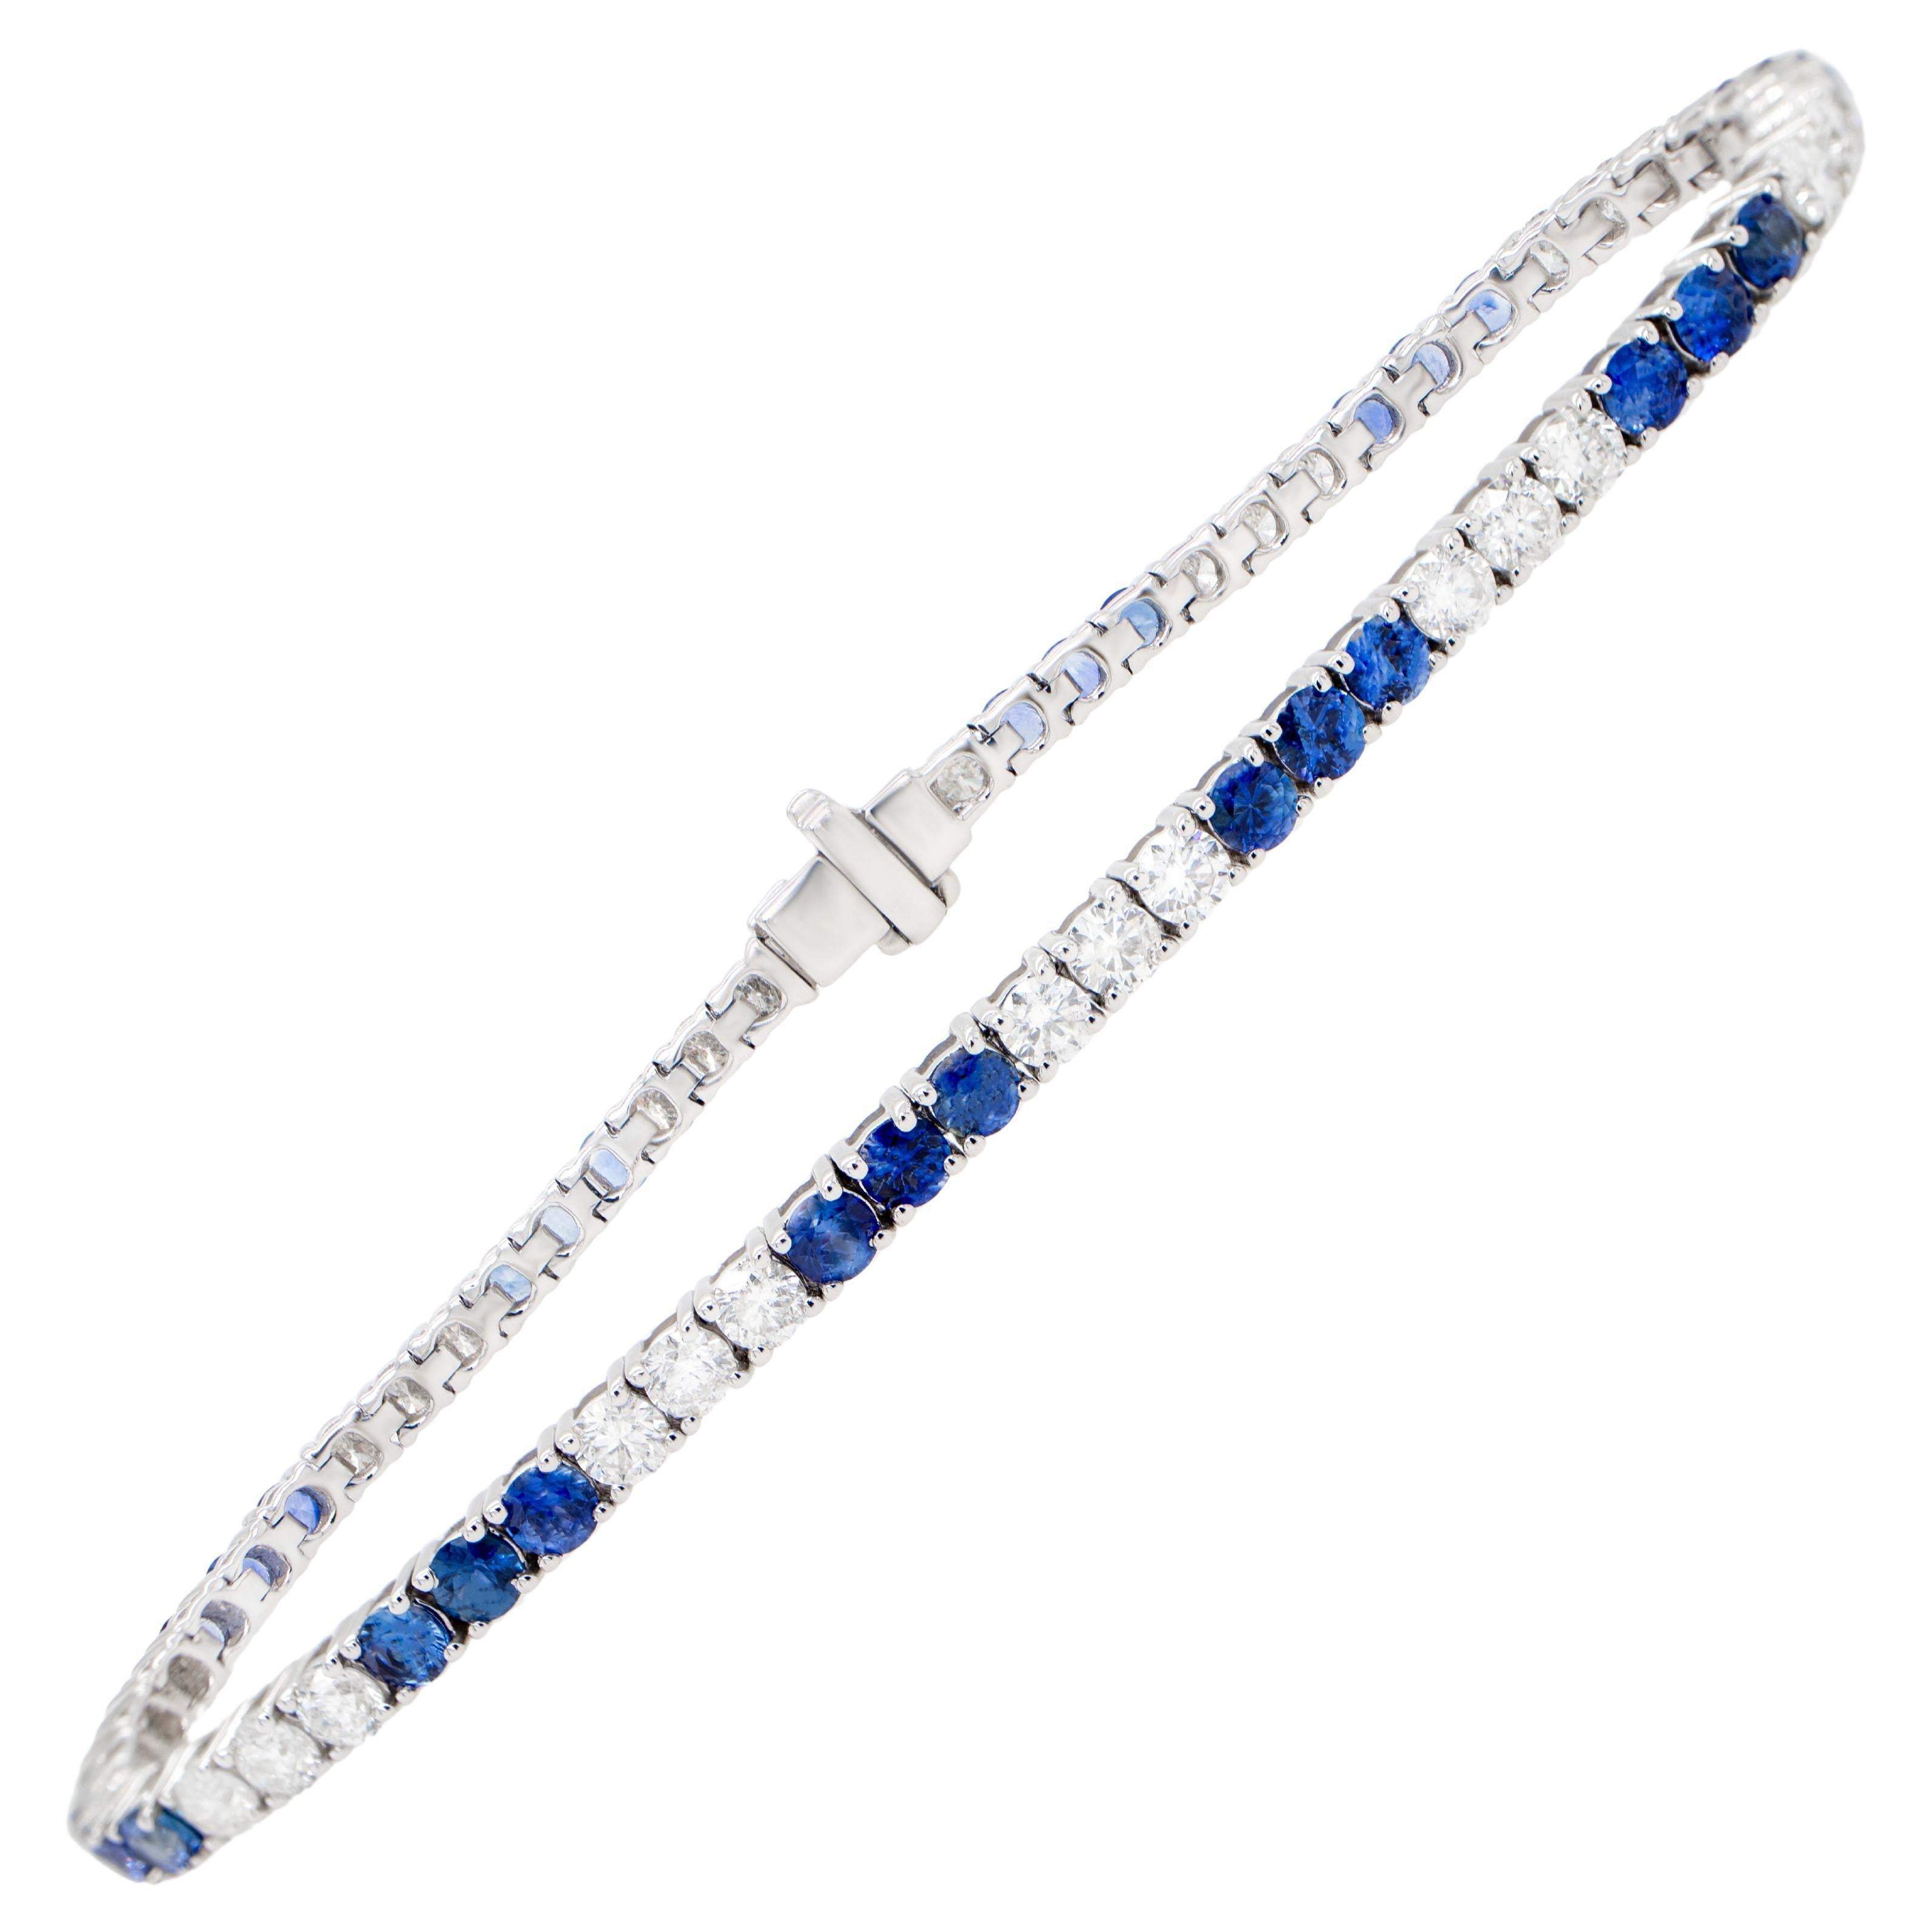 It comes with the Gemological Appraisal by GIA GG/AJP
All Gemstones are Natural
Blue Sapphires = 2.76 Carats
Diamonds = 2.54 Carats
Metal: 18K White Gold
Length: 7 Inches
Width: 0.12 Inches